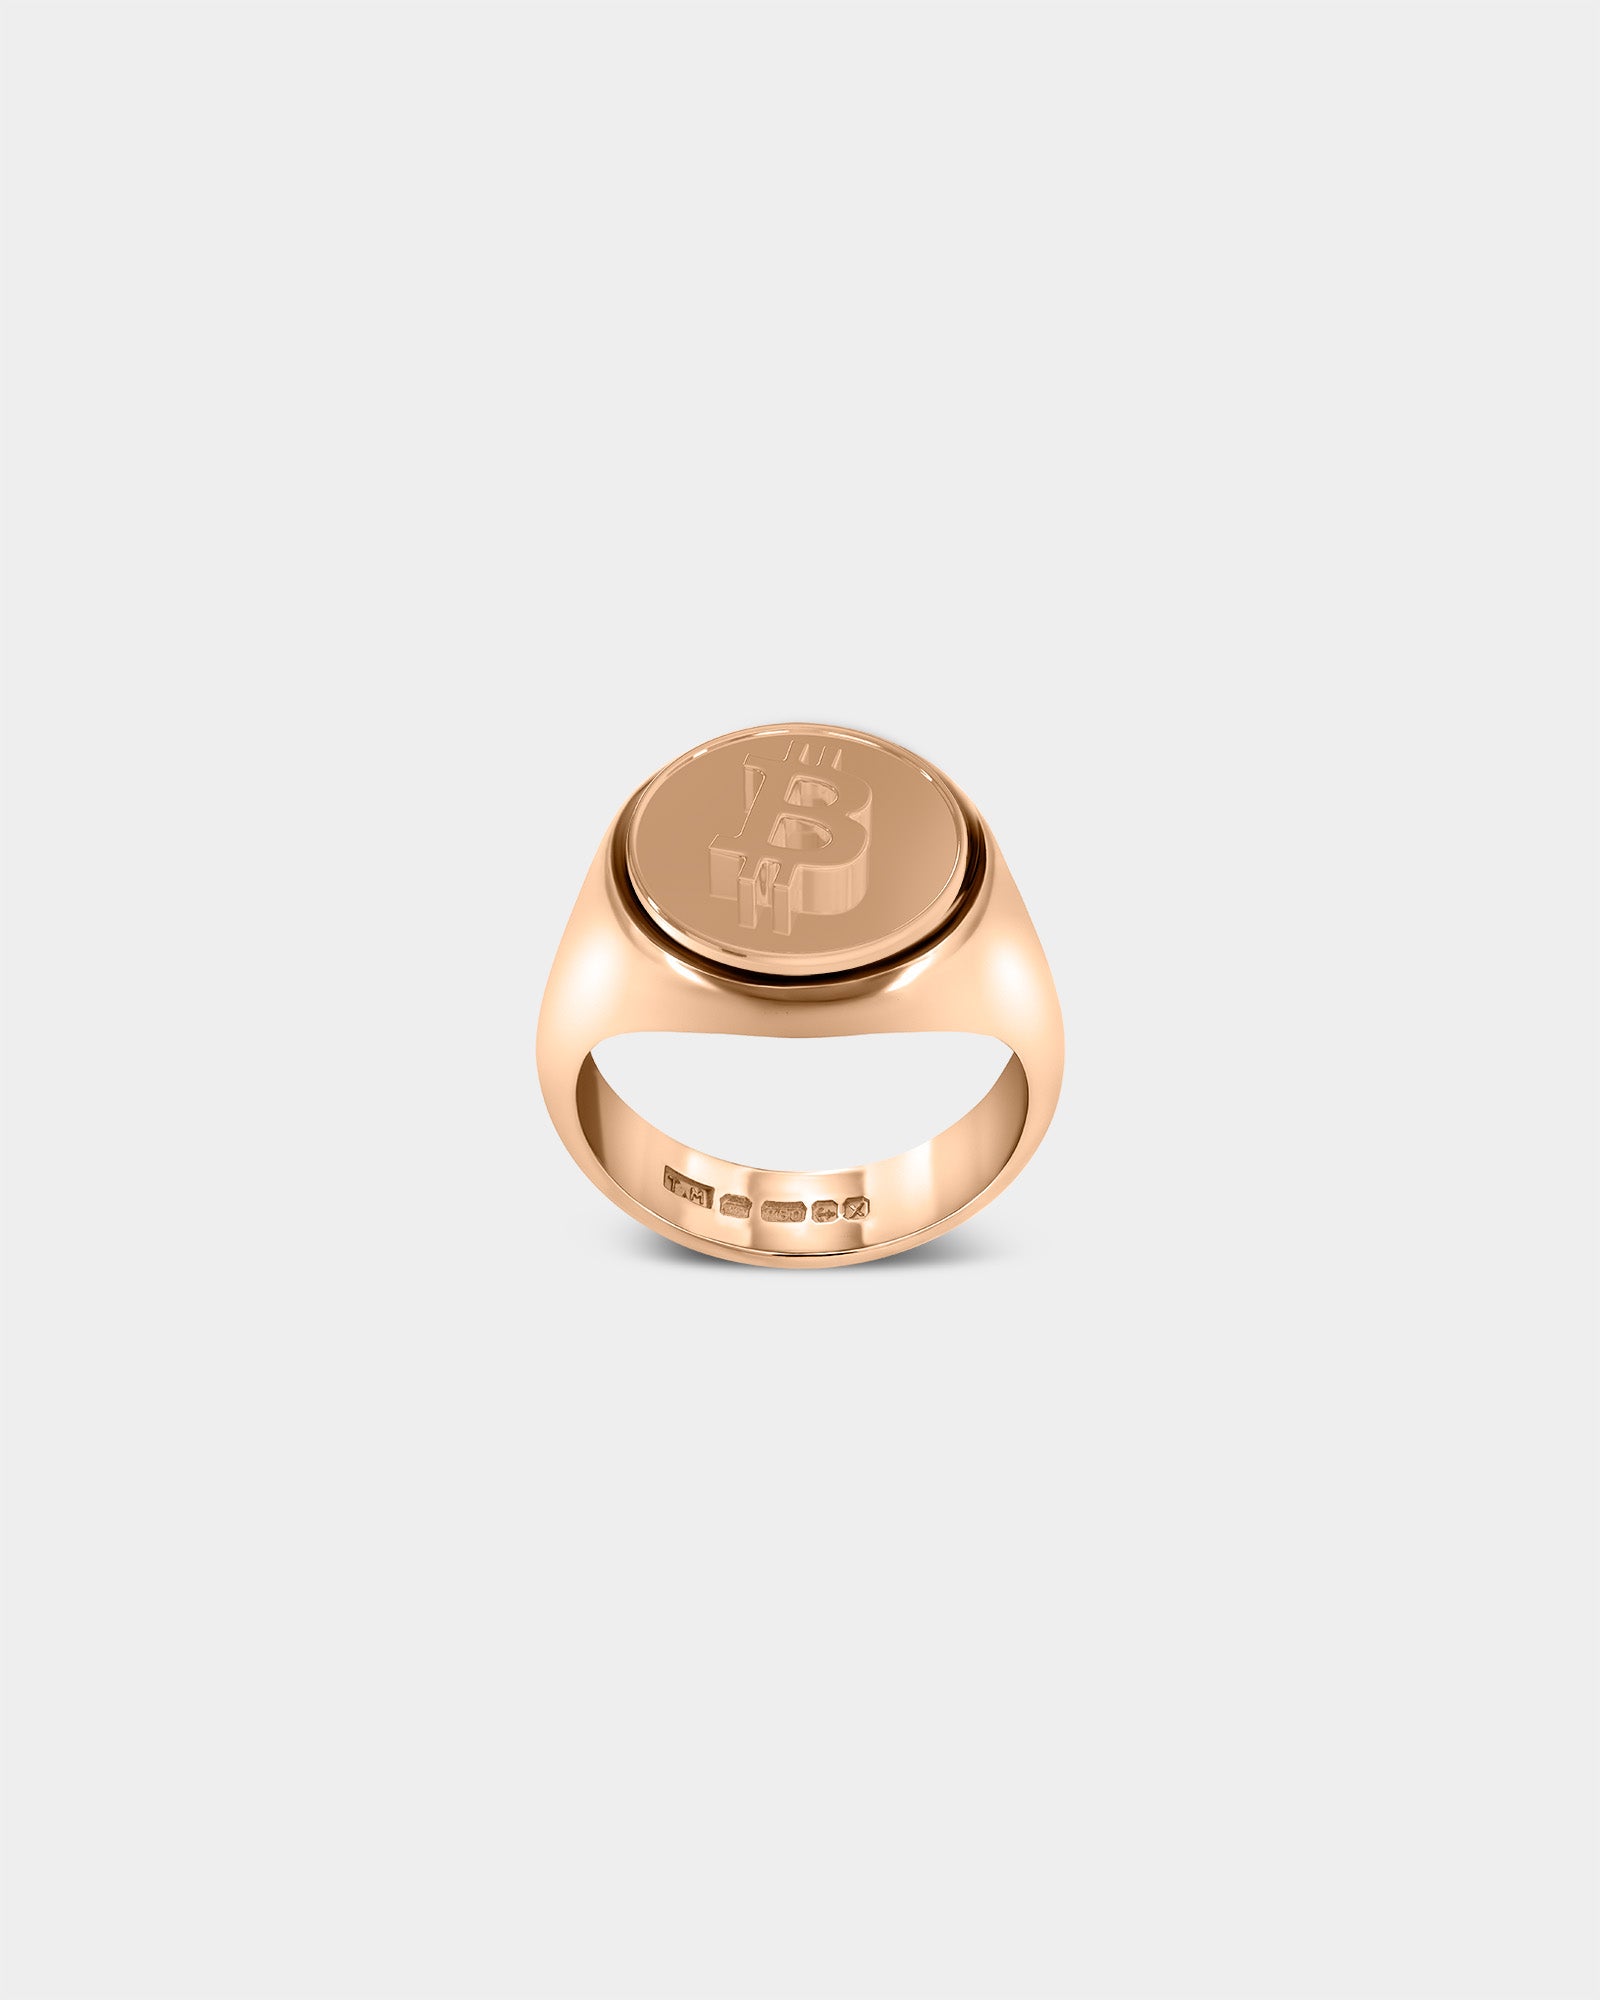 Large Bitcoin Crypto Ring in 9k Rose Gold by Wilson Grant